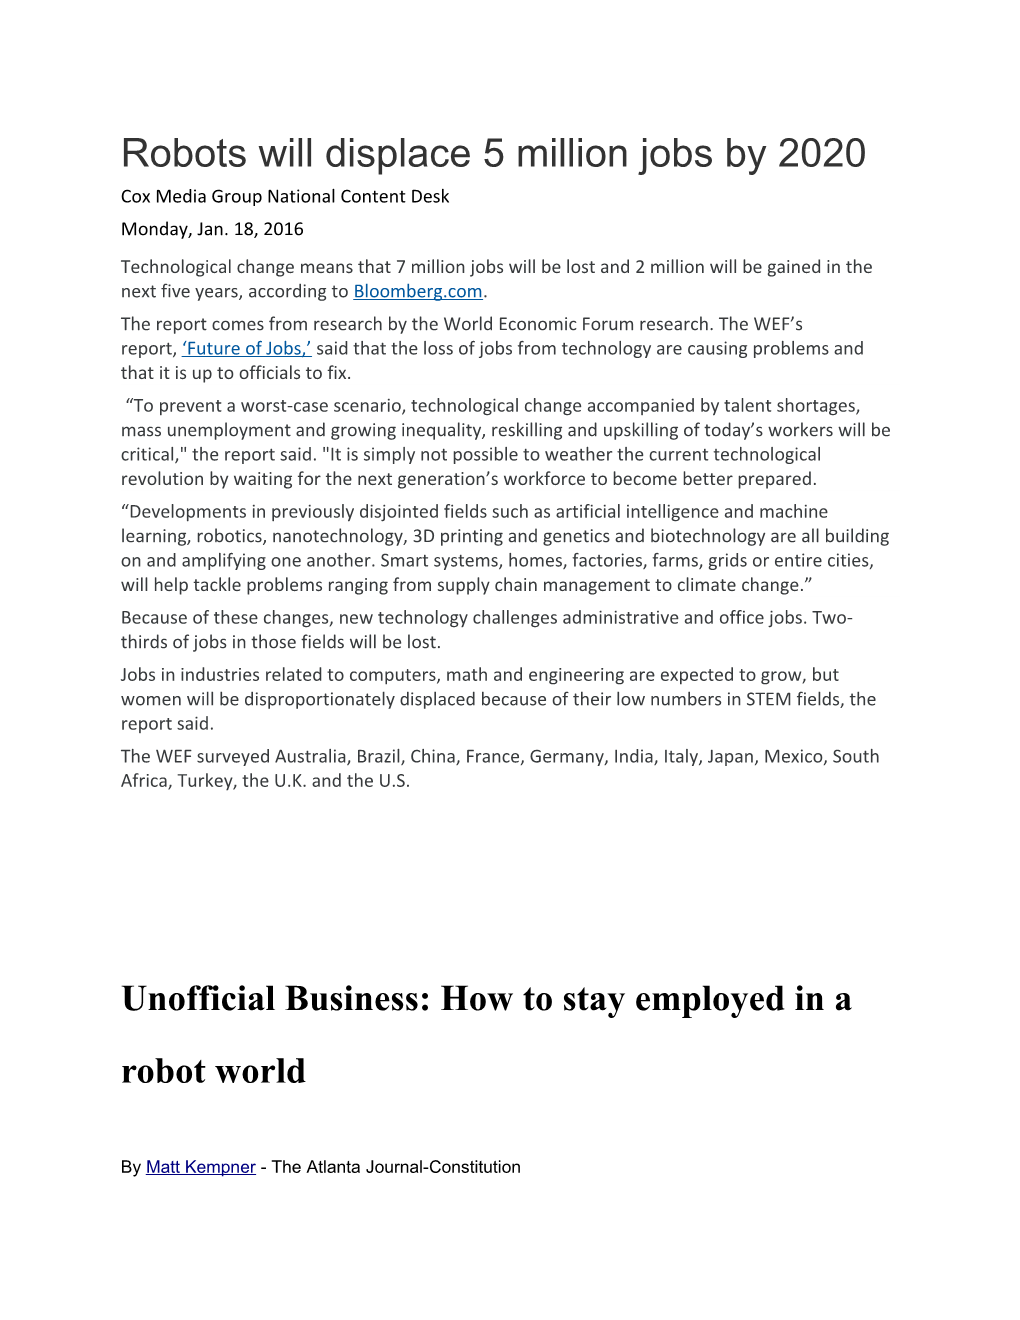 Robots Will Displace 5 Million Jobs by 2020